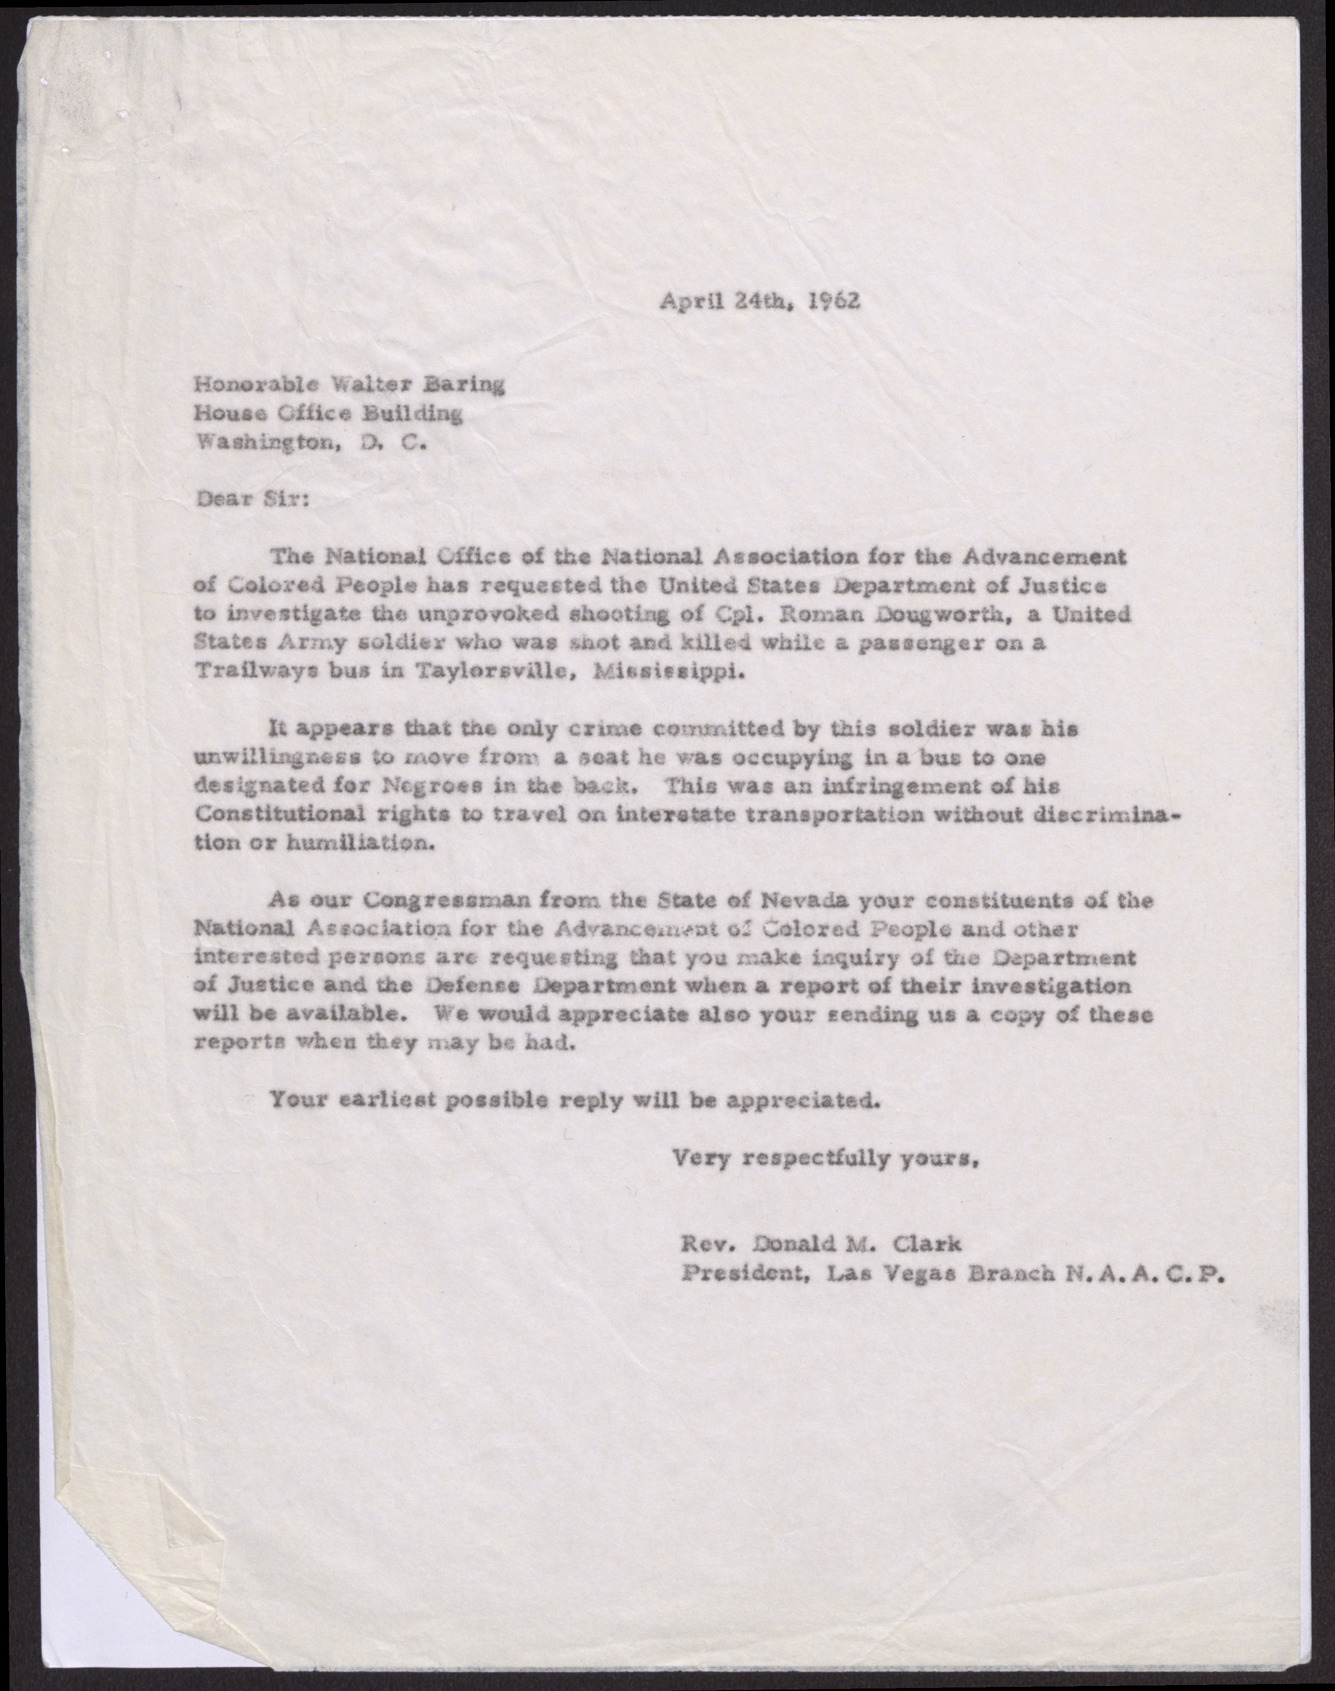 Letter to Honorable Walter Baring from Rev. Donald Clark, April 24, 1962